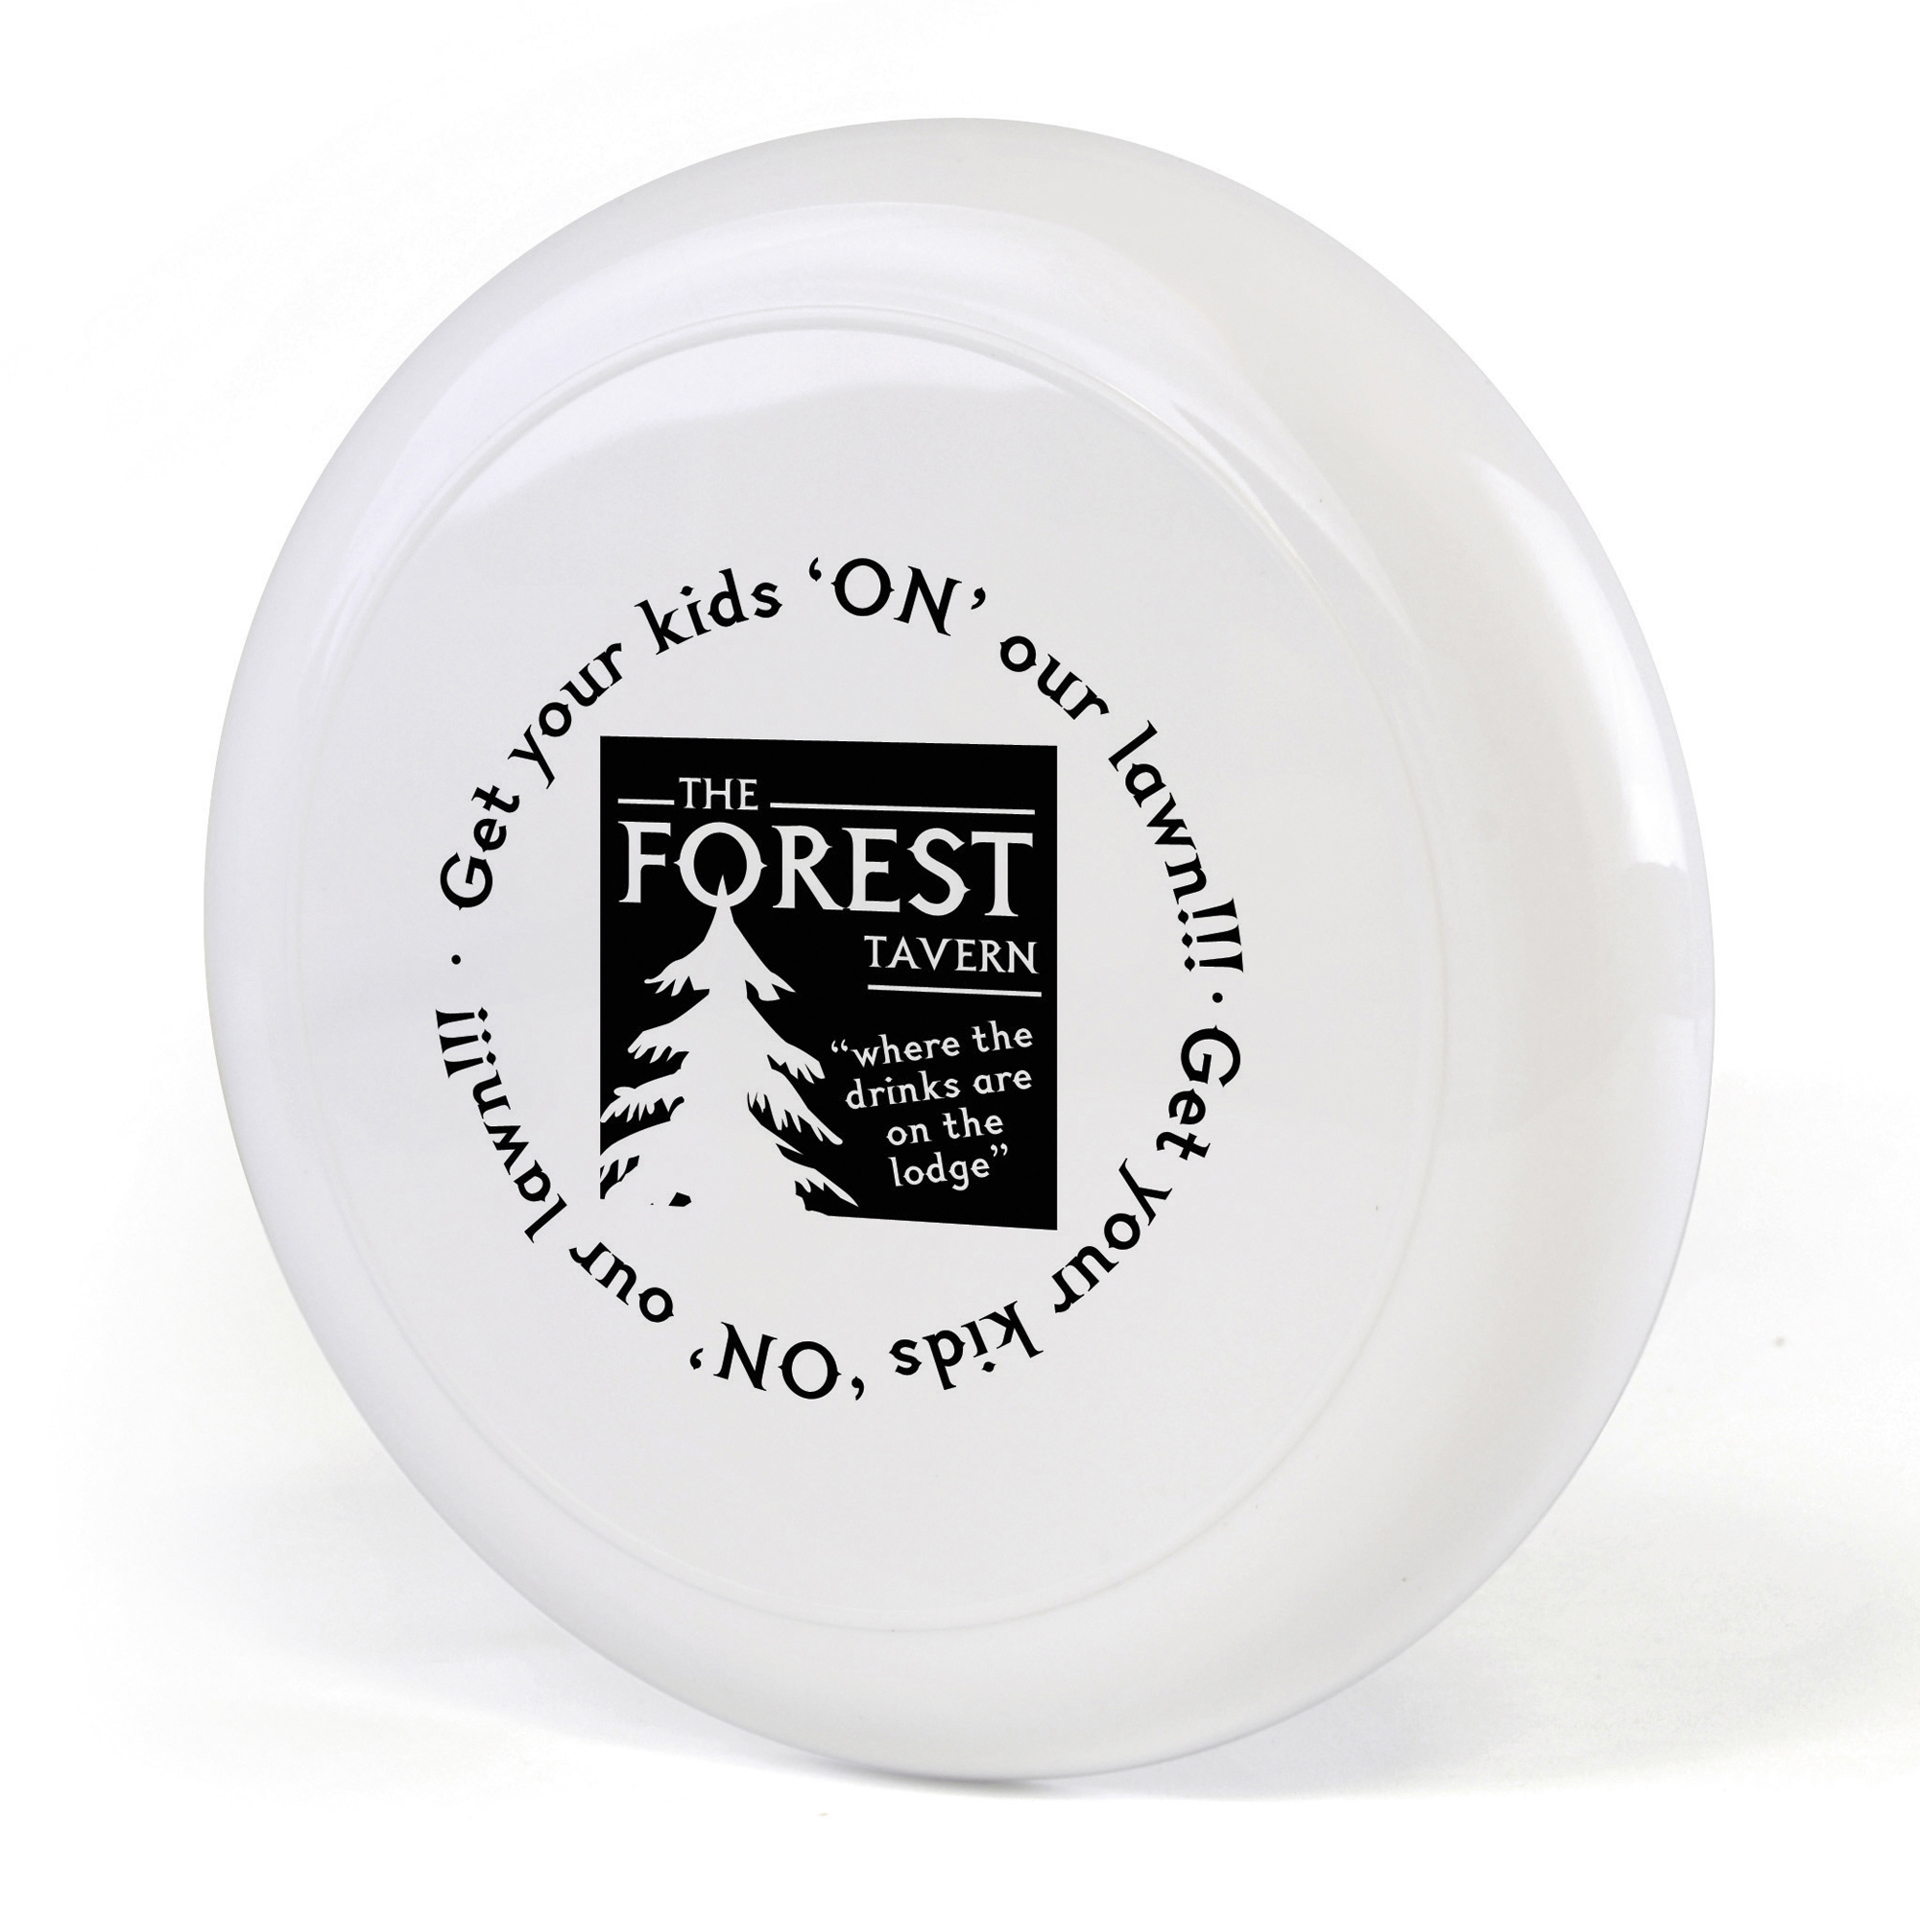 Low Cost Frisbee in white with 1 colour print